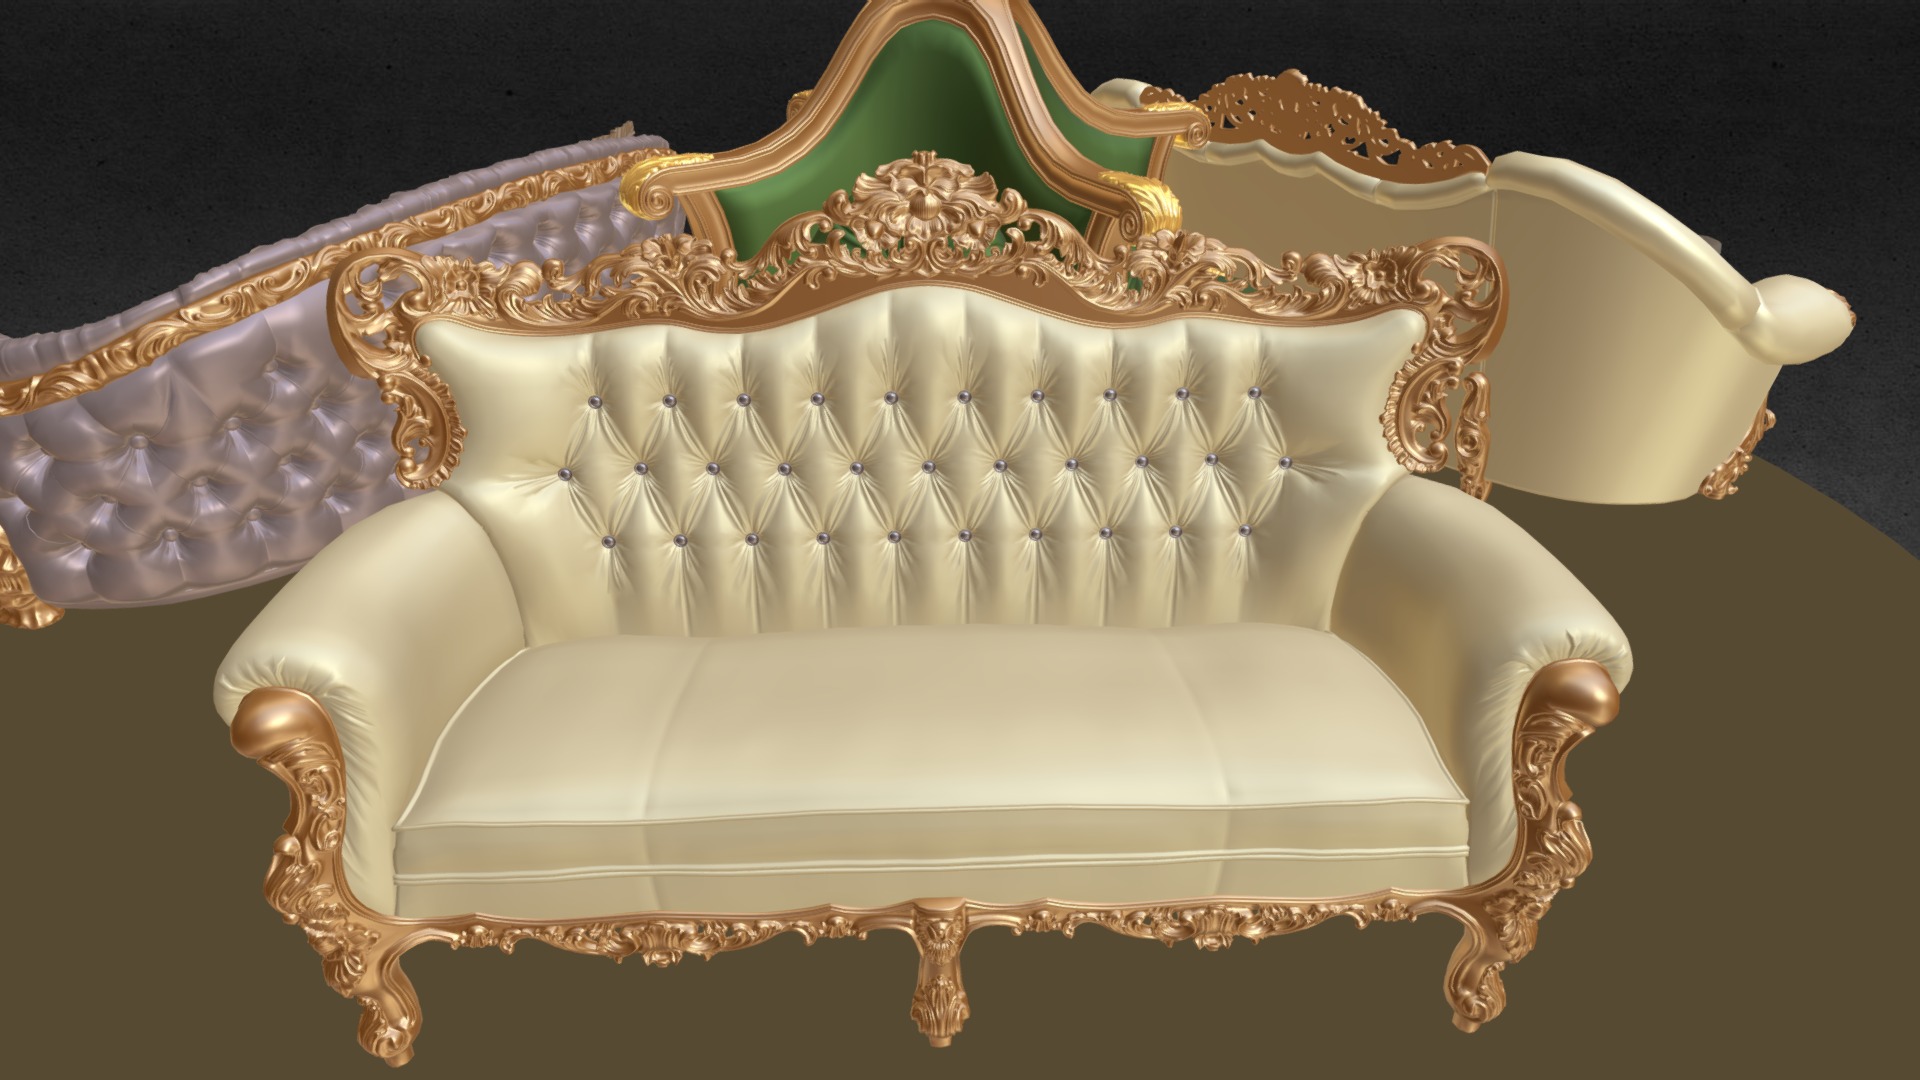 3D model 1D BAROQUE SOFAS collection - This is a 3D model of the 1D BAROQUE SOFAS collection. The 3D model is about a gold and white chair.